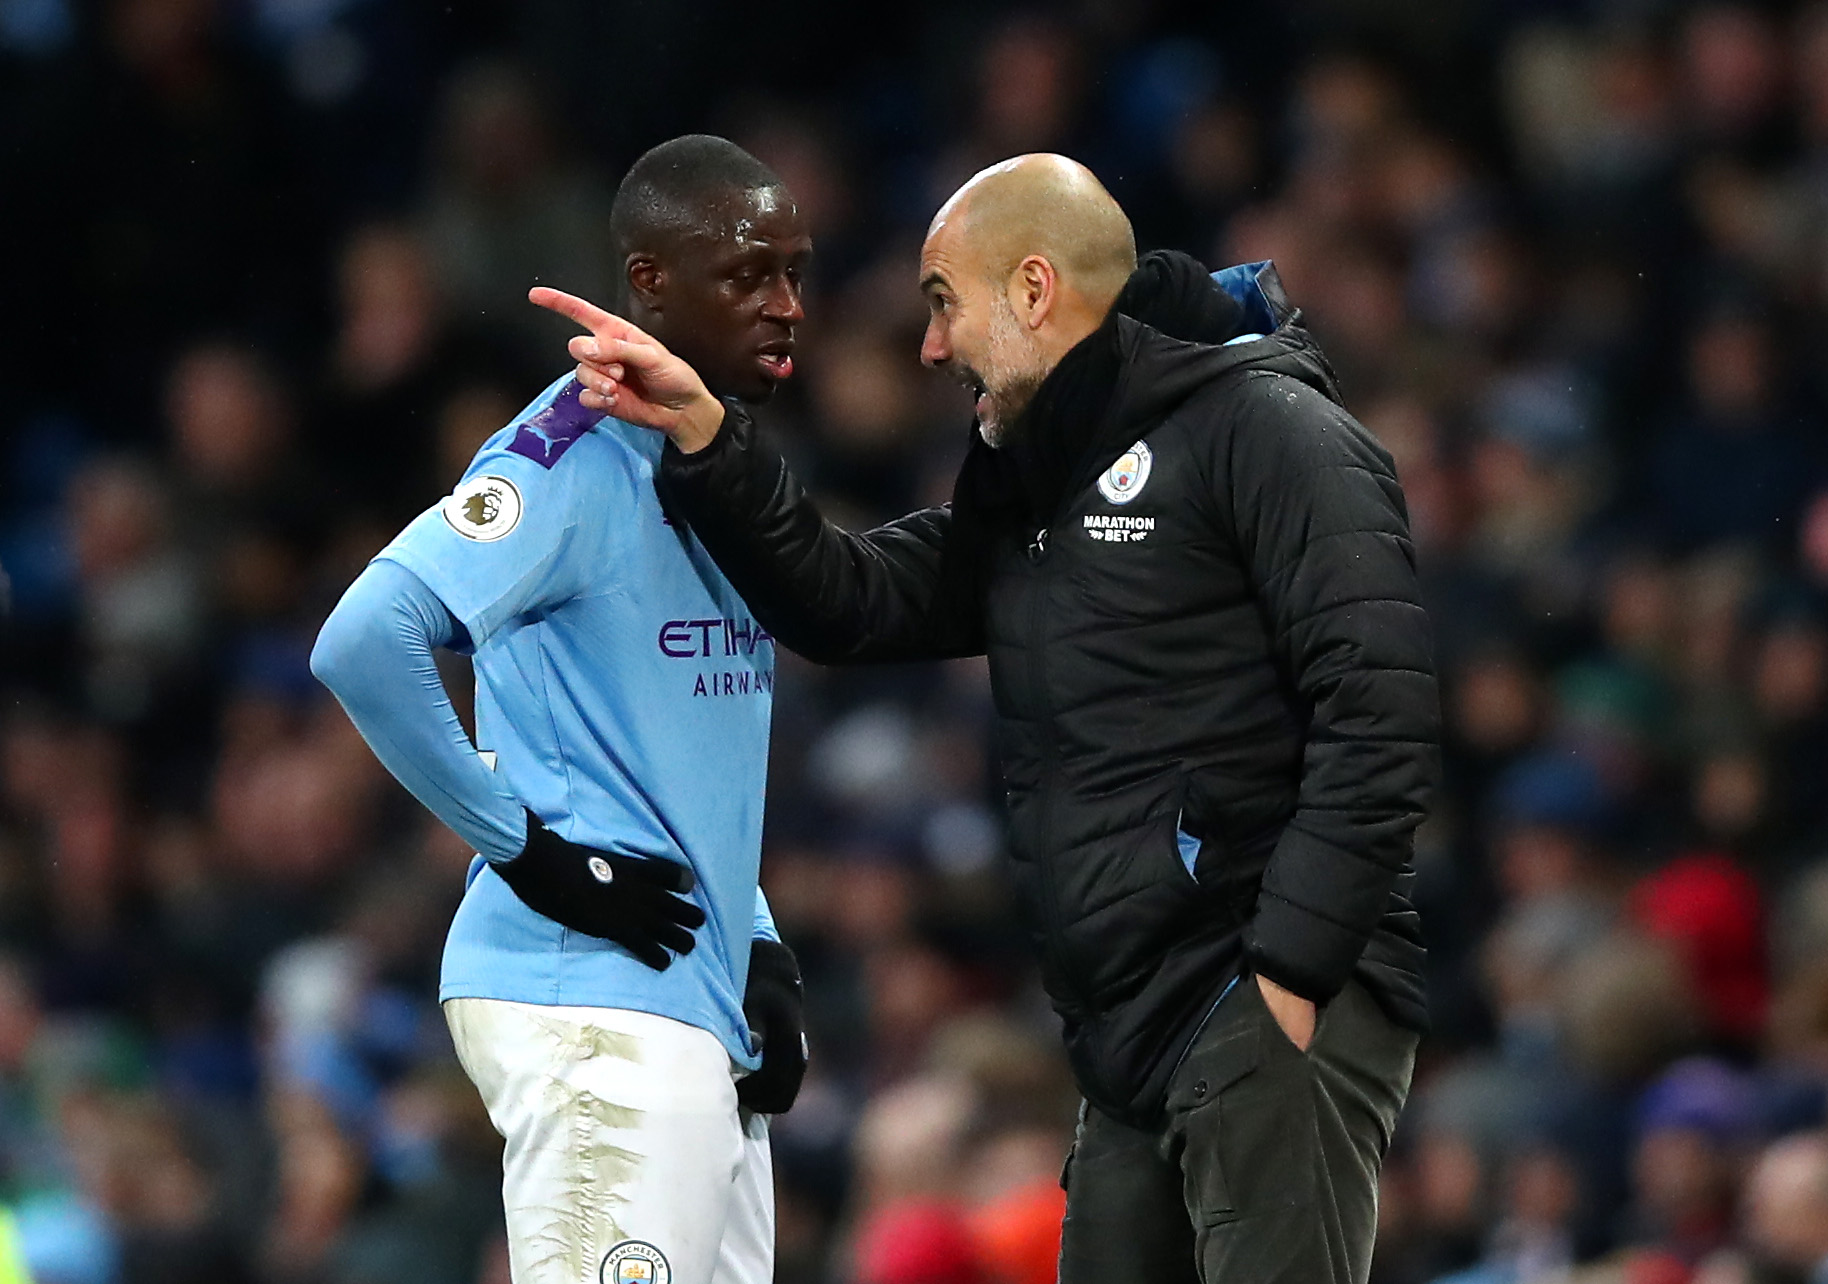 Benjamin Mendy is suspended for the game (Photo by Clive Brunskill/Getty Images)